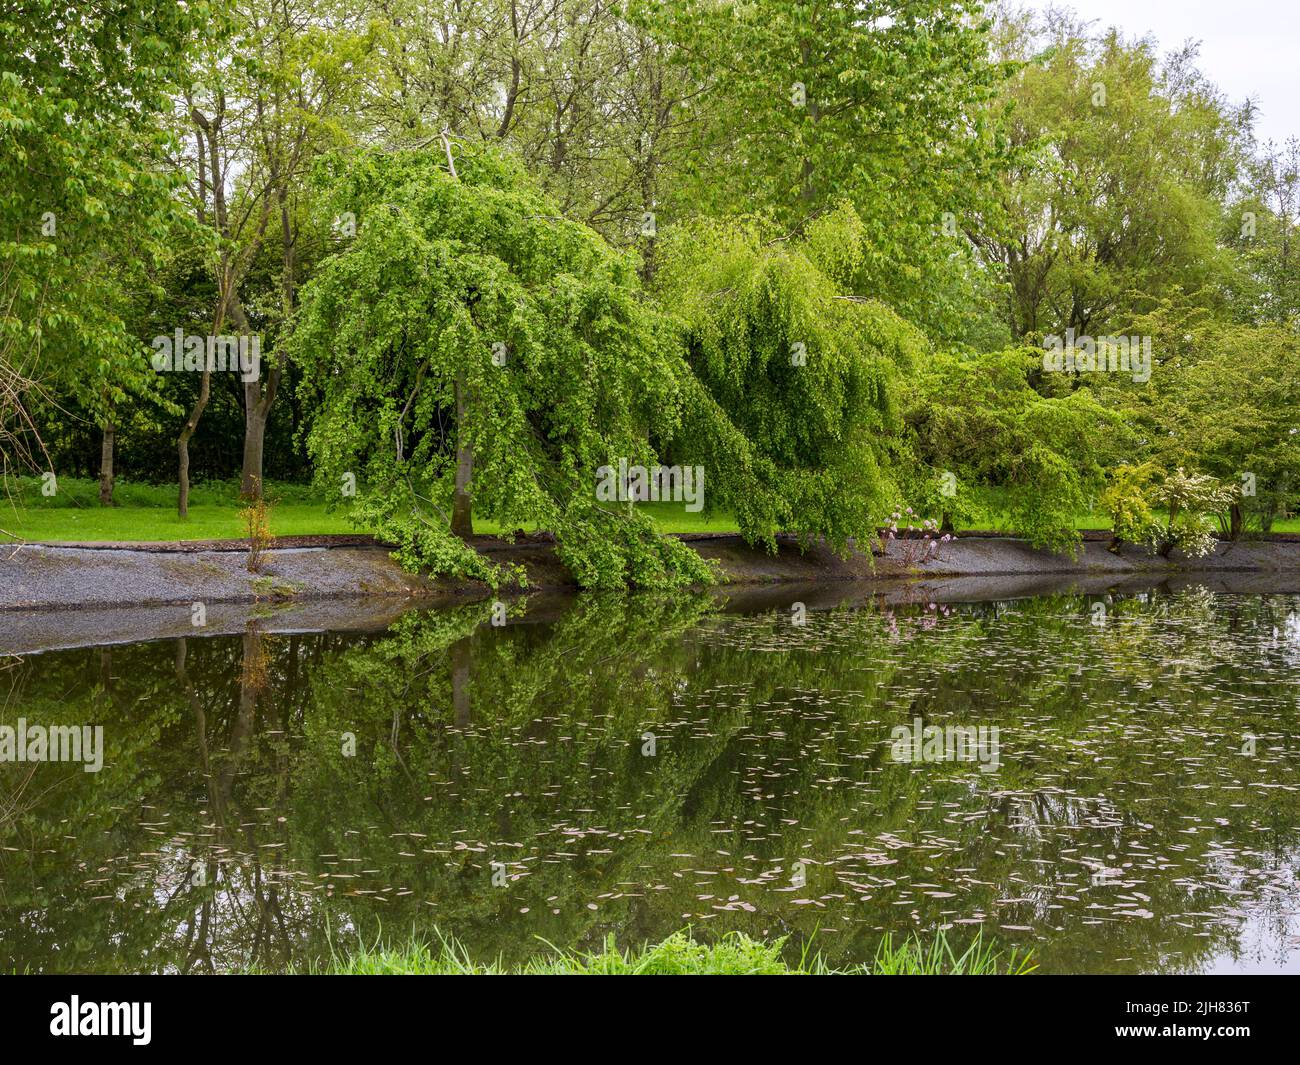 Weeping willow tree reflected in a pond Stock Photo